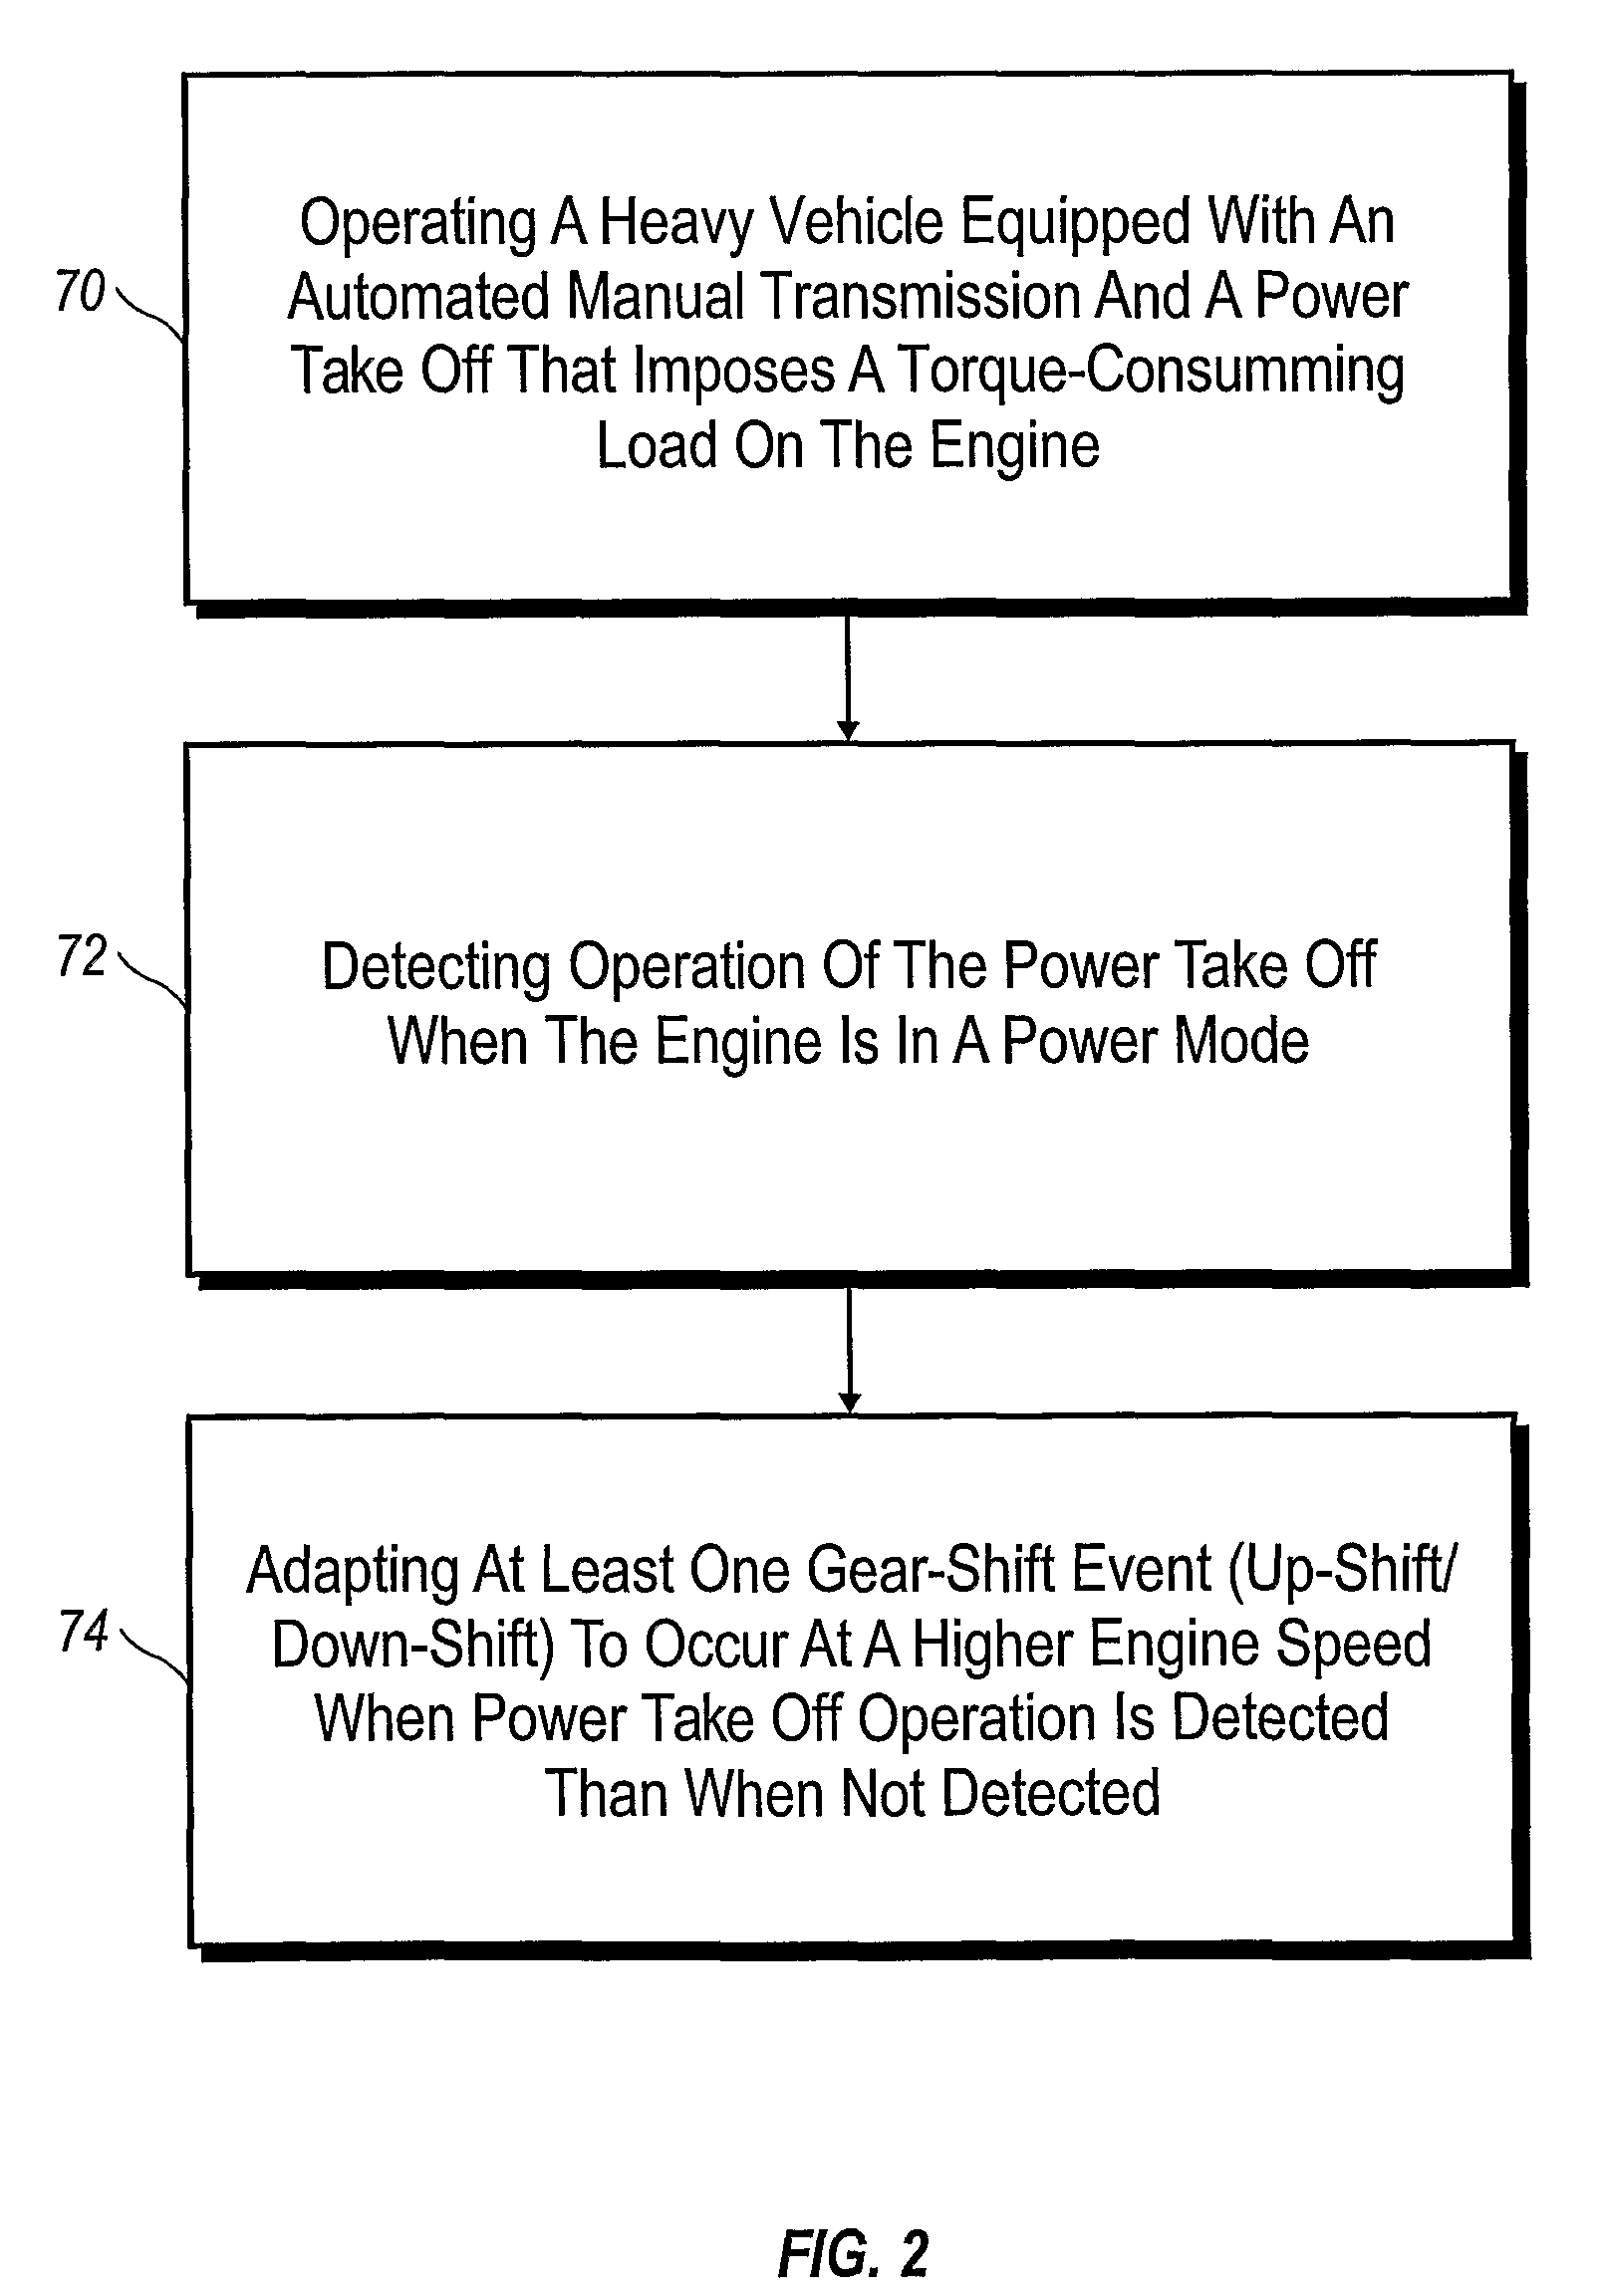 Method and Arrangement For Adapting Shifting Strategies in a Heavy Vehicle Including an Automated Transmission and Experiencing a Pto Load